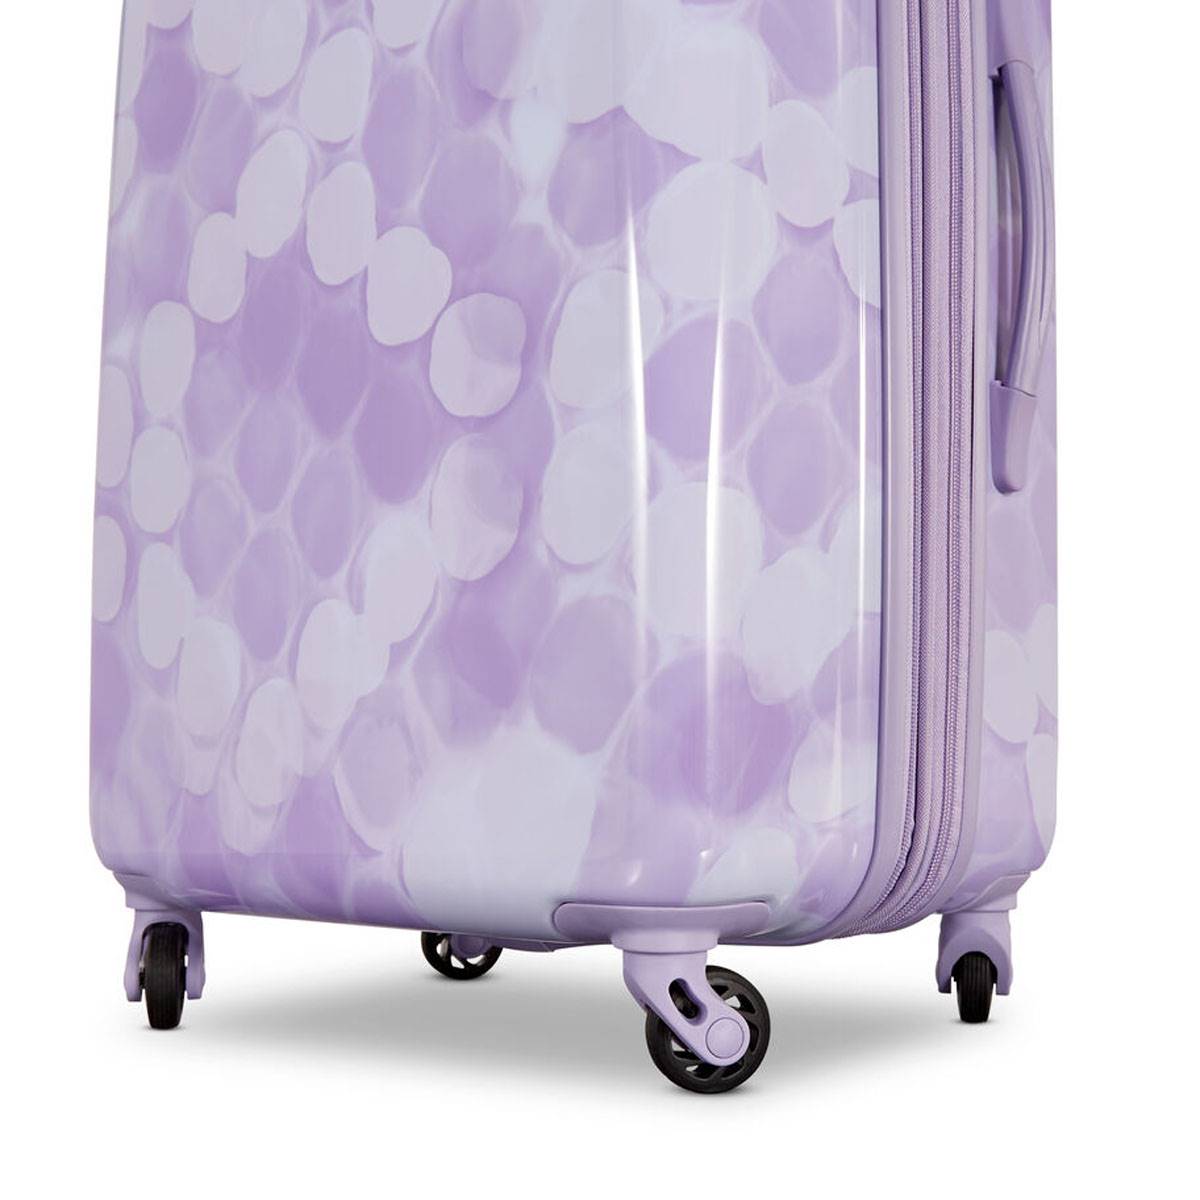 American Tourister Moonlight 25in. Spinner Luggage